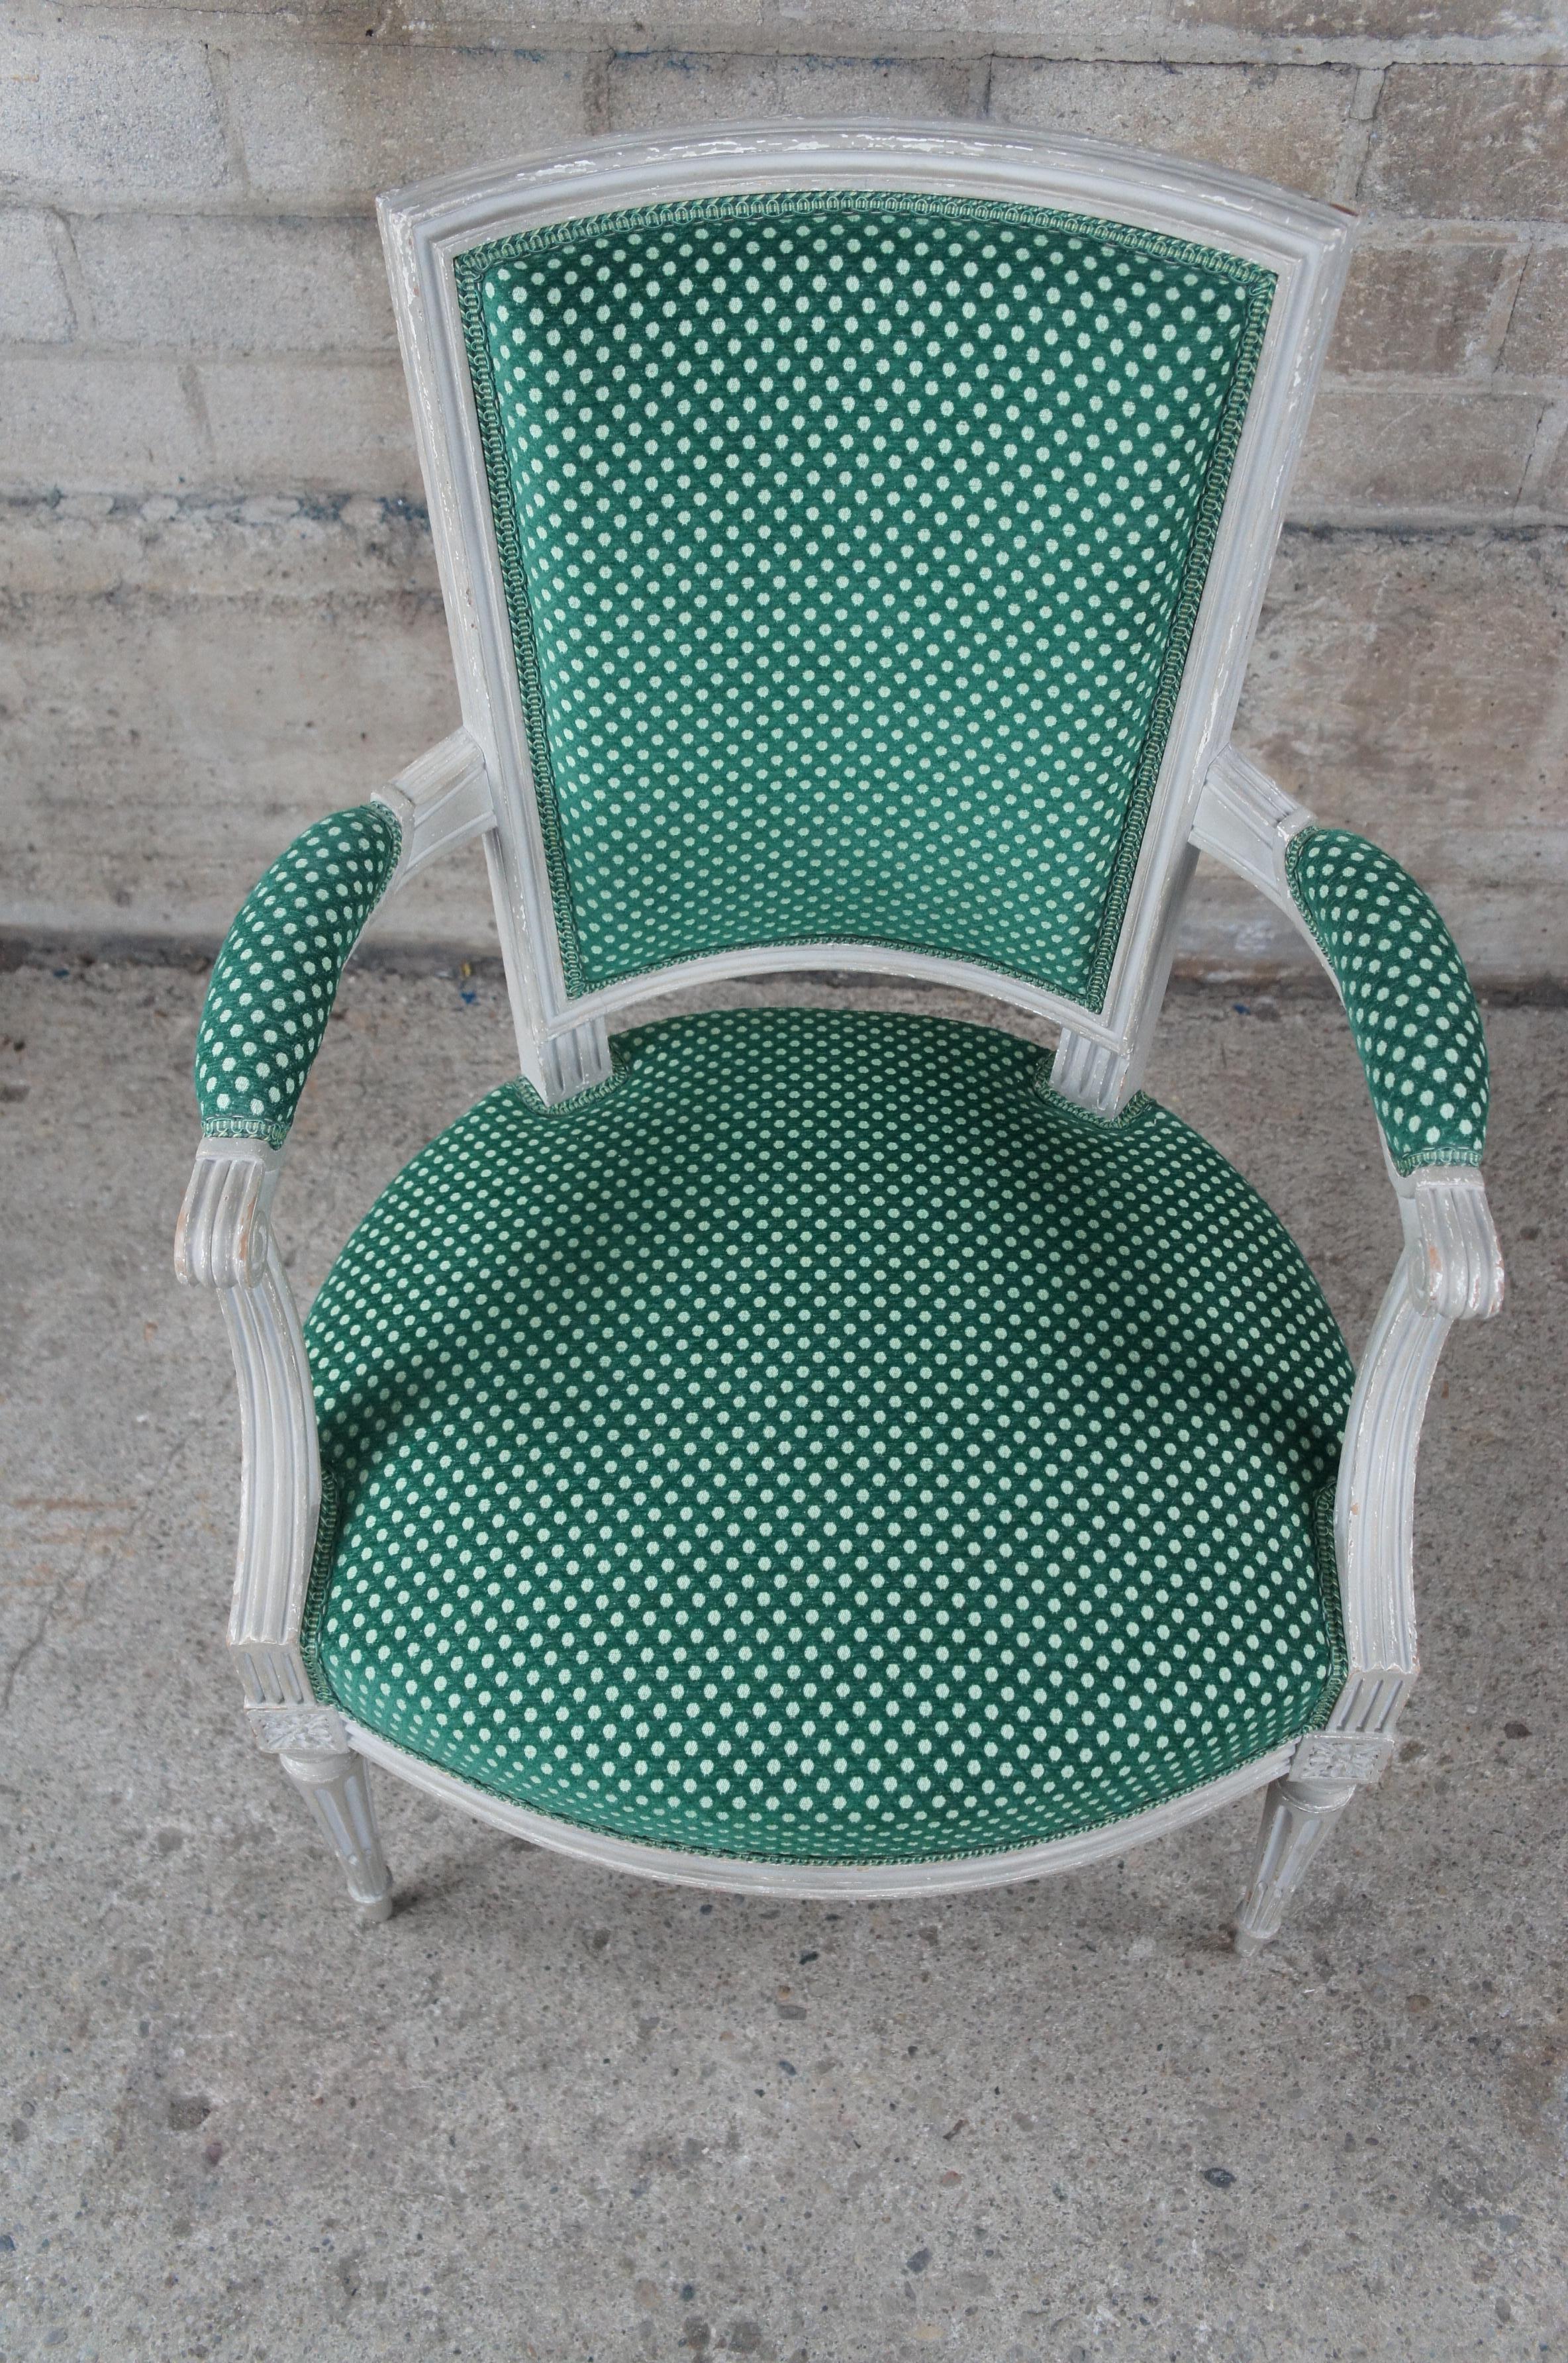 Vintage Louis XVI Style Fauteuil Library Arm Chair French Provincial Polka Dot For Sale 4